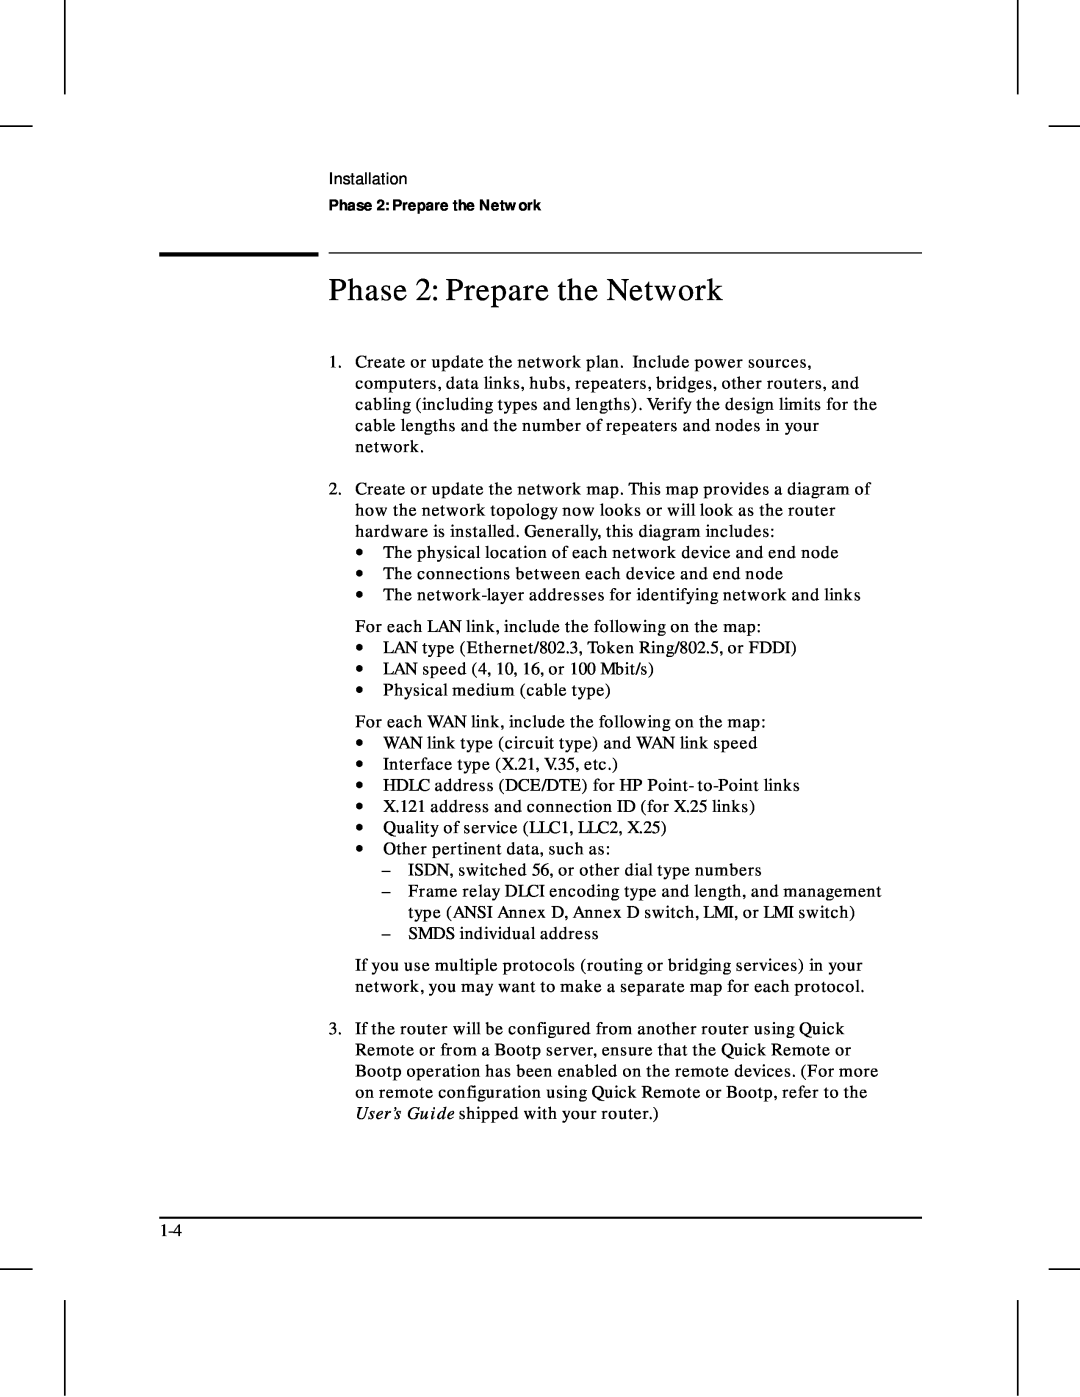 HP 480 manual Phase 2 Prepare the Network 